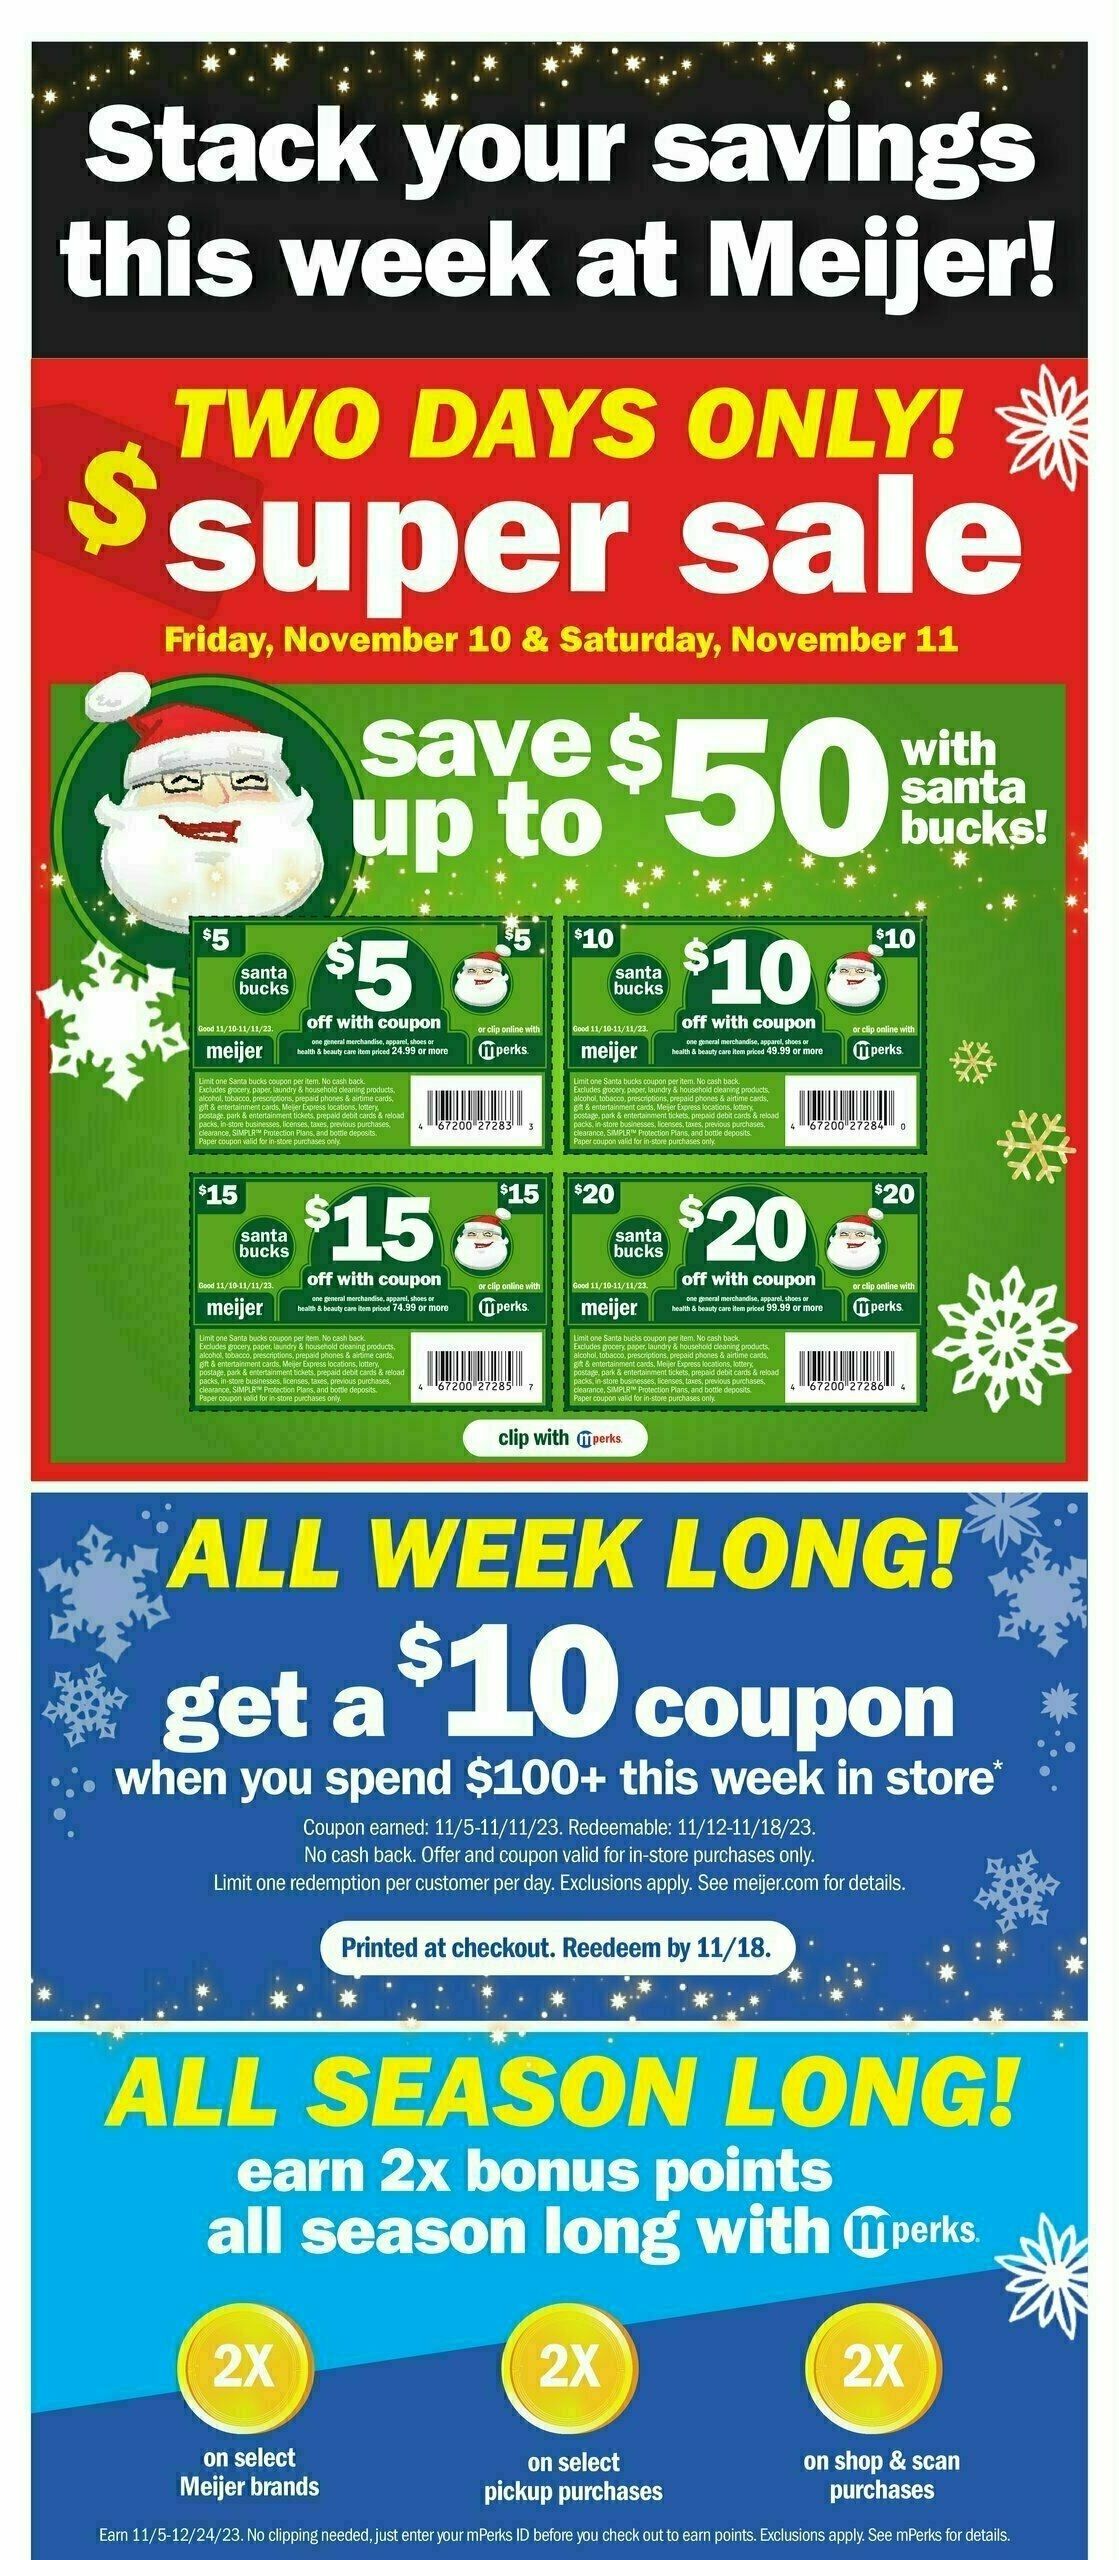 Meijer Super Sale Ad Weekly Ad from November 10